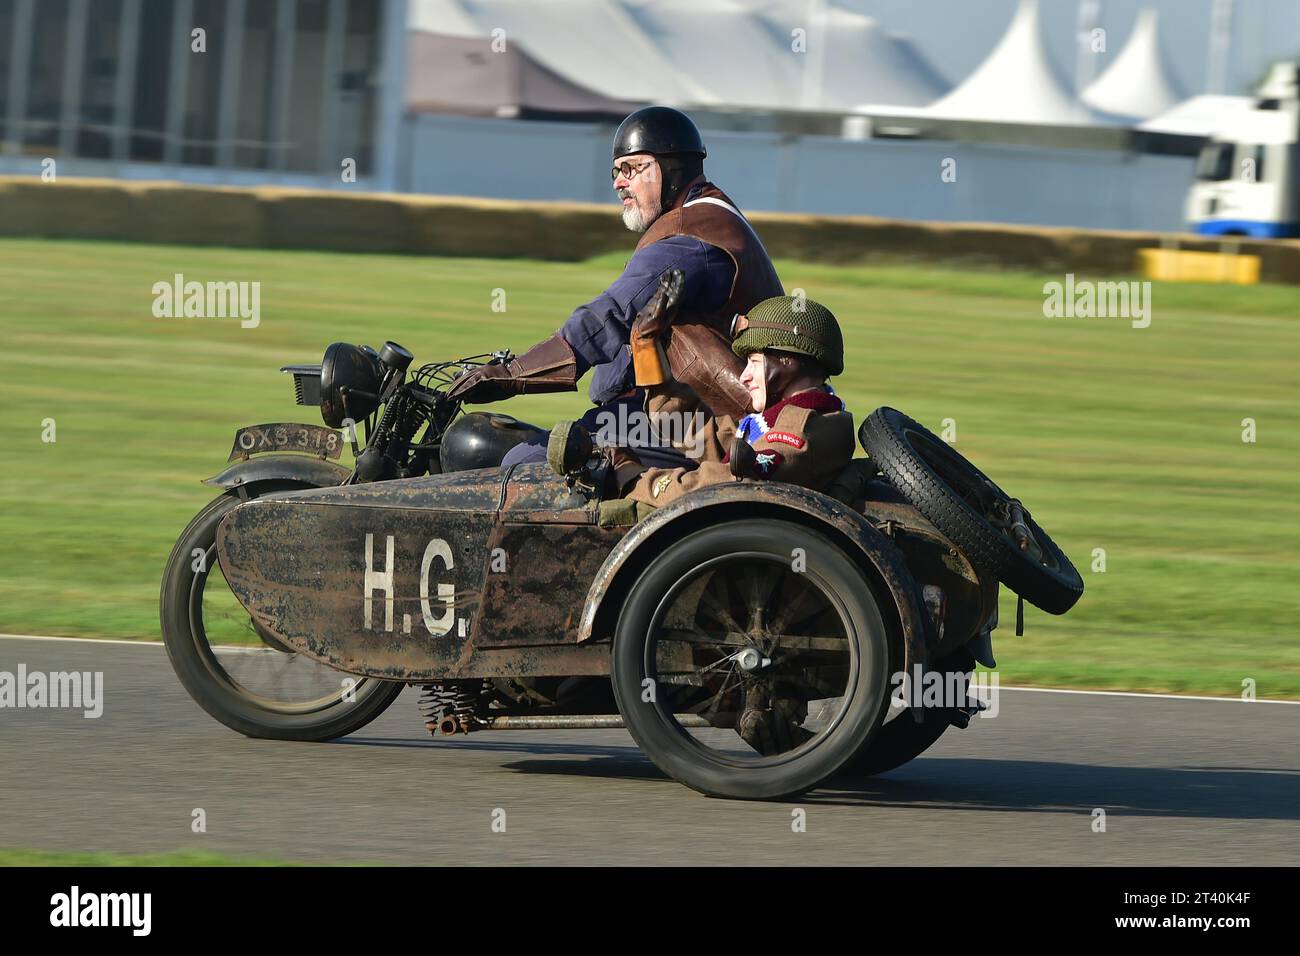 1943 Royal Enfield Motorcyle and sidecar combination, Track Parade - Motorcycle Celebration, circa 200 bikes featured in the morning parade laps, incl Stock Photo